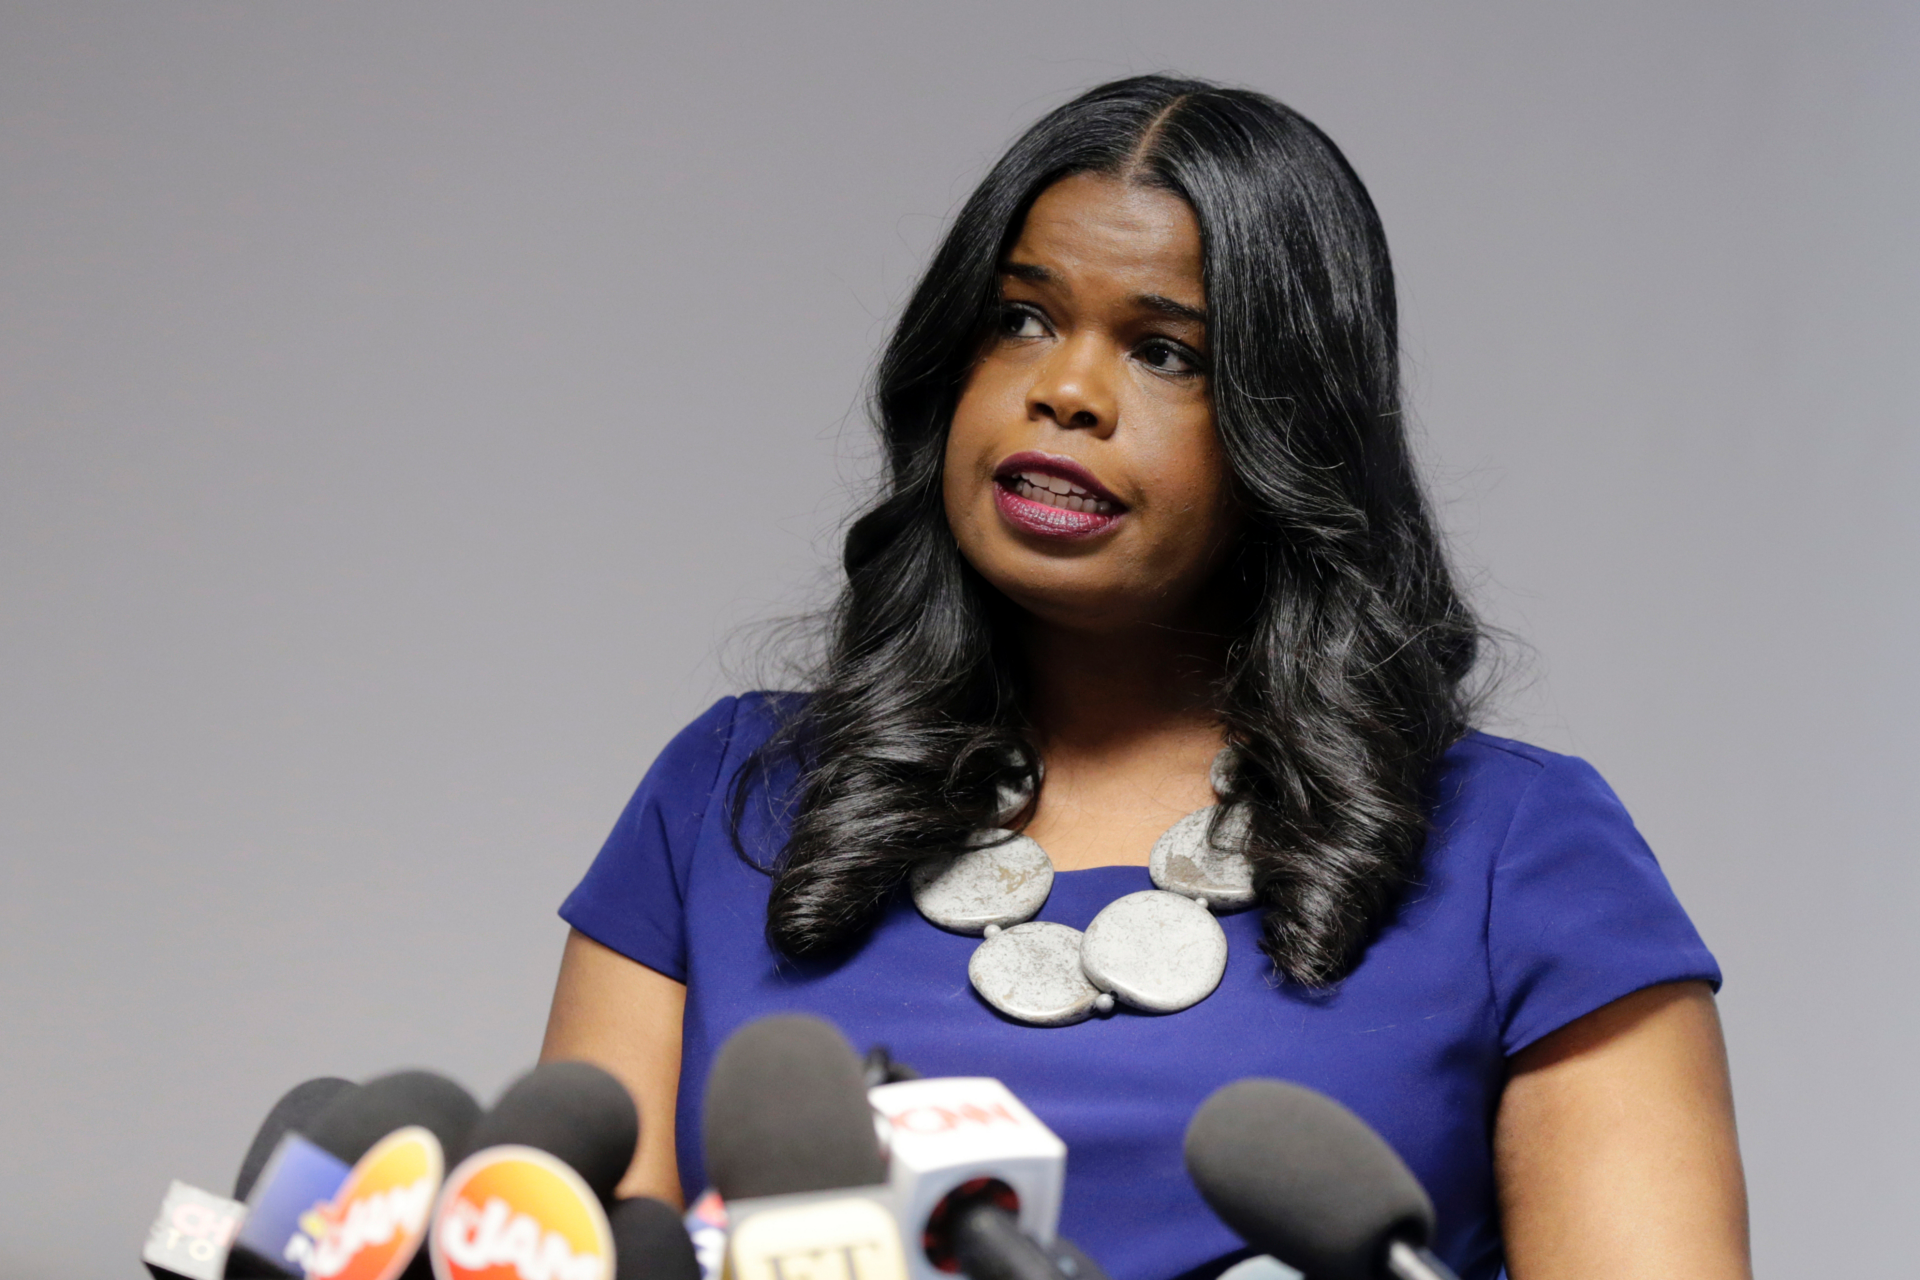 Chicago-area DA Kim Foxx ripped by Illinois Republican after Oak Brook mall shooting